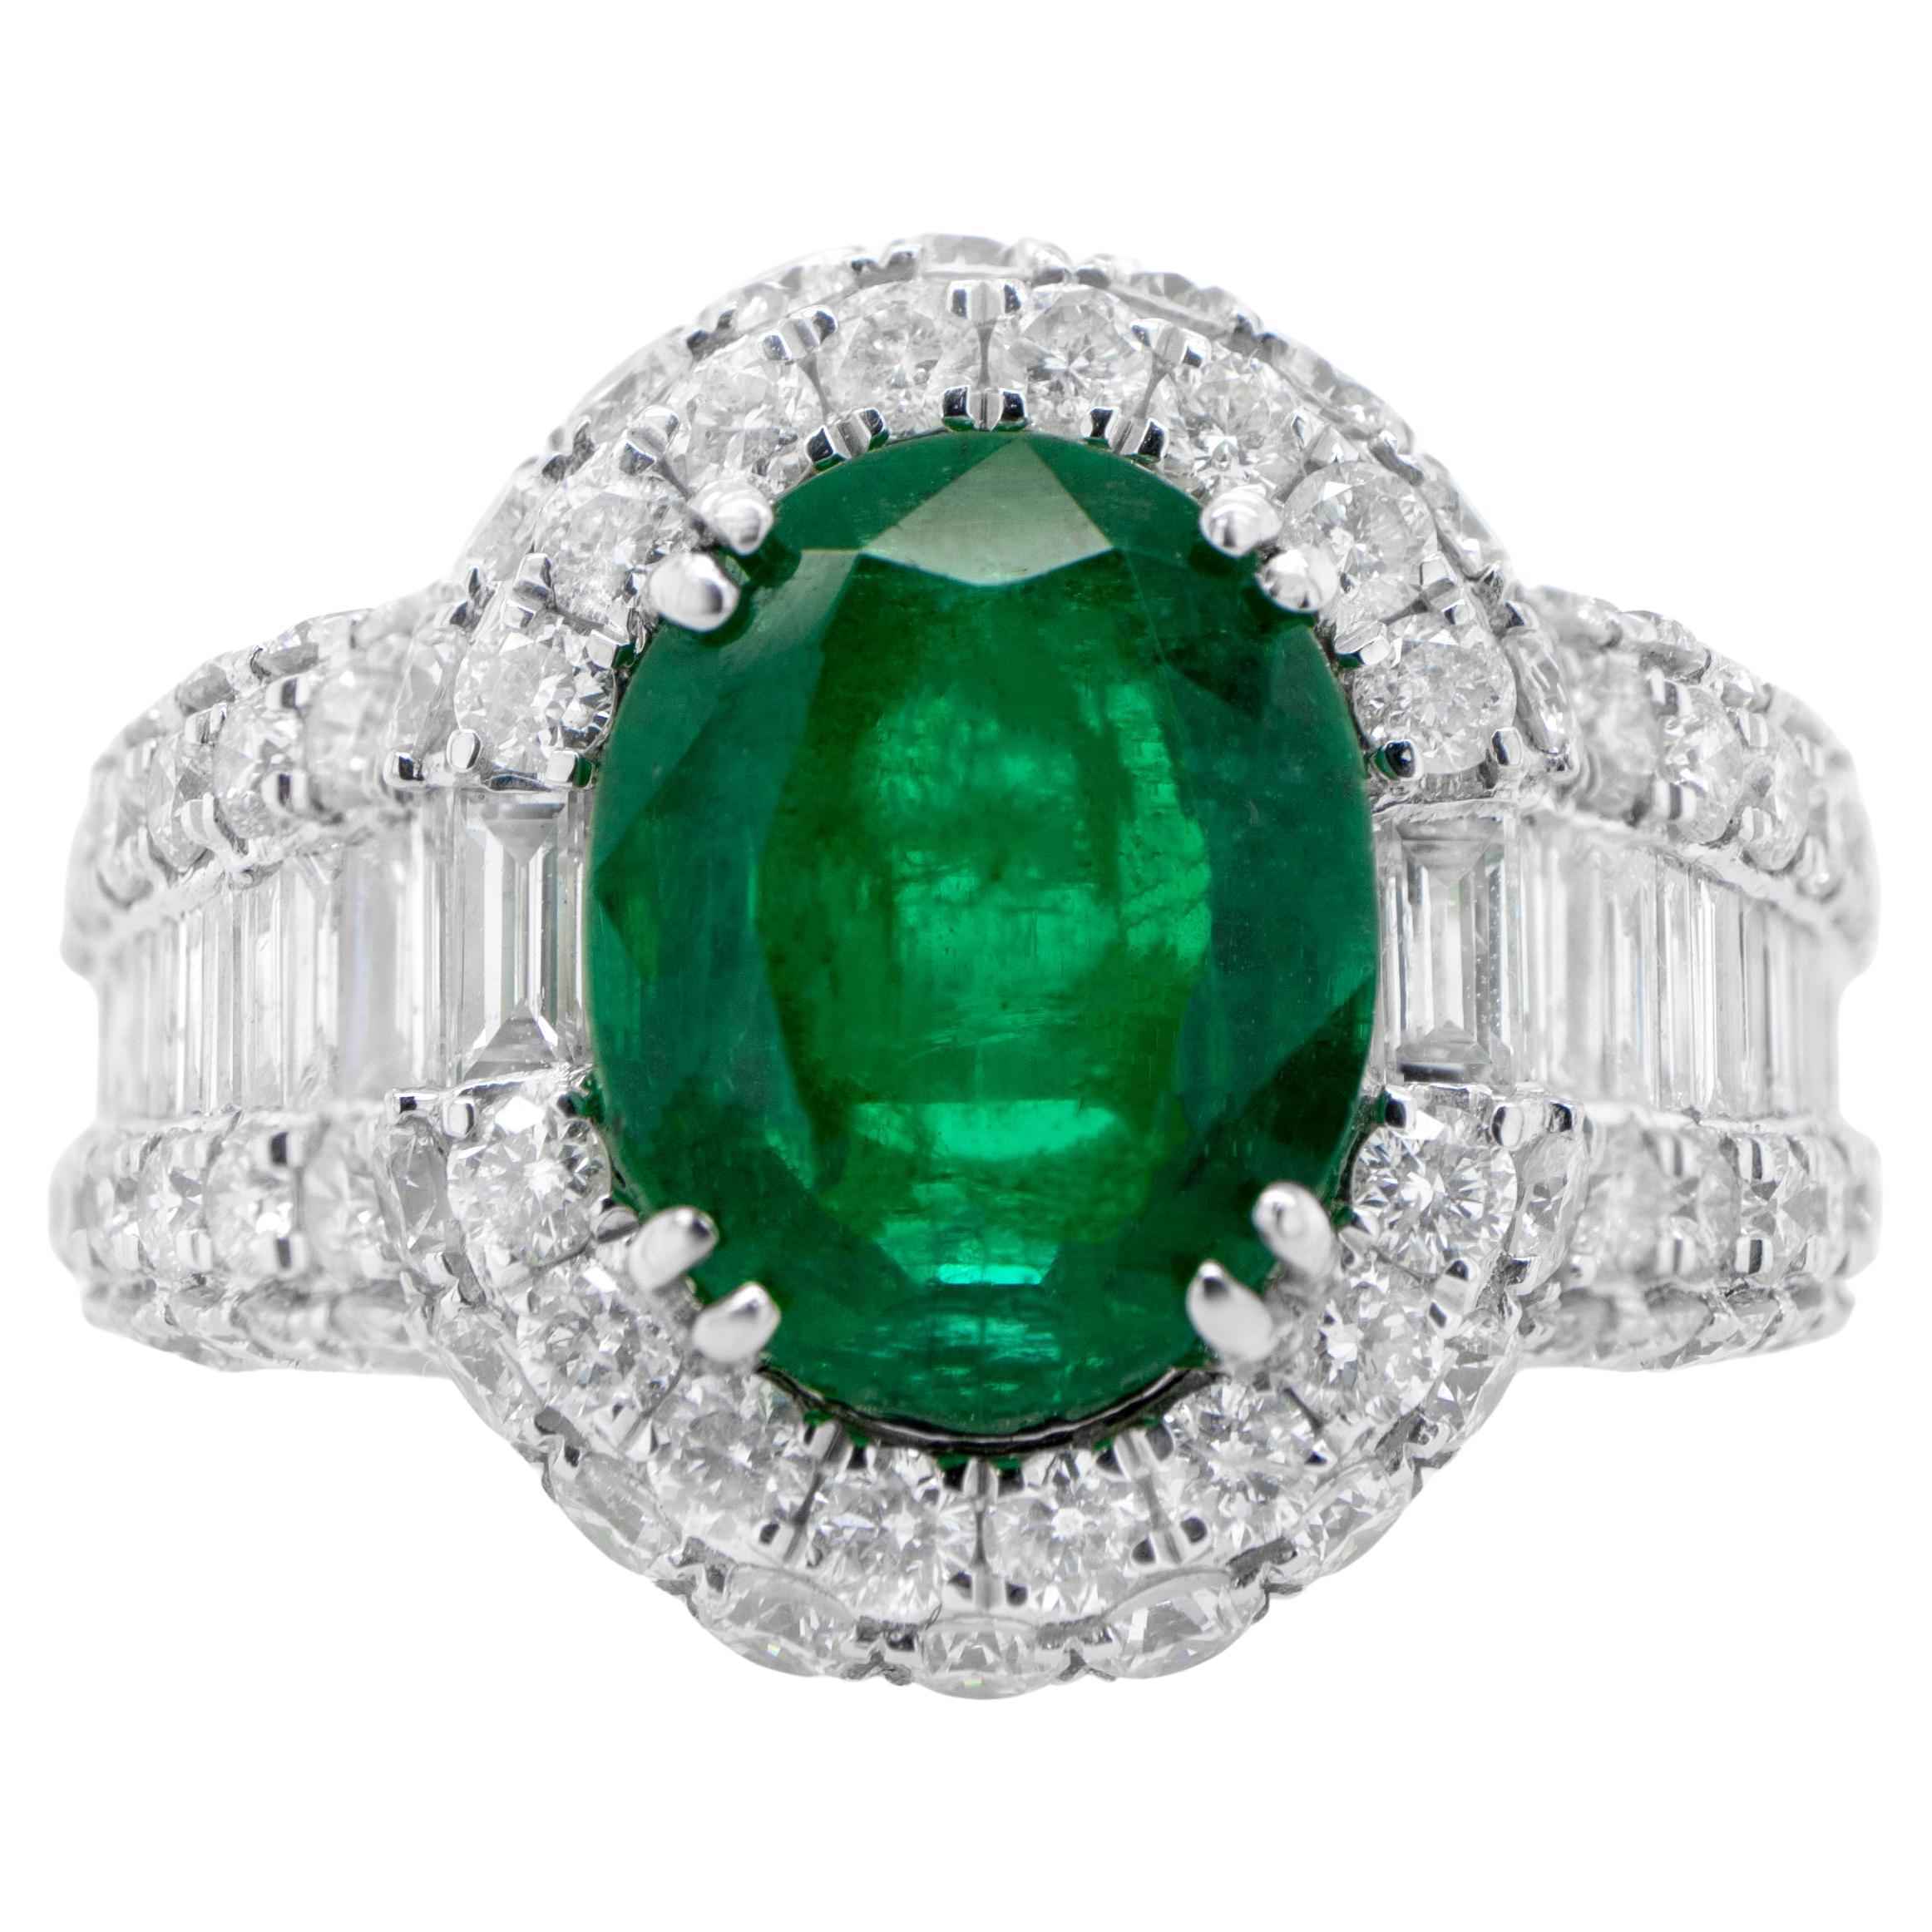 Oval Emerald Statement Ring With Diamond Setting 5.22 Carats 18K Gold For Sale